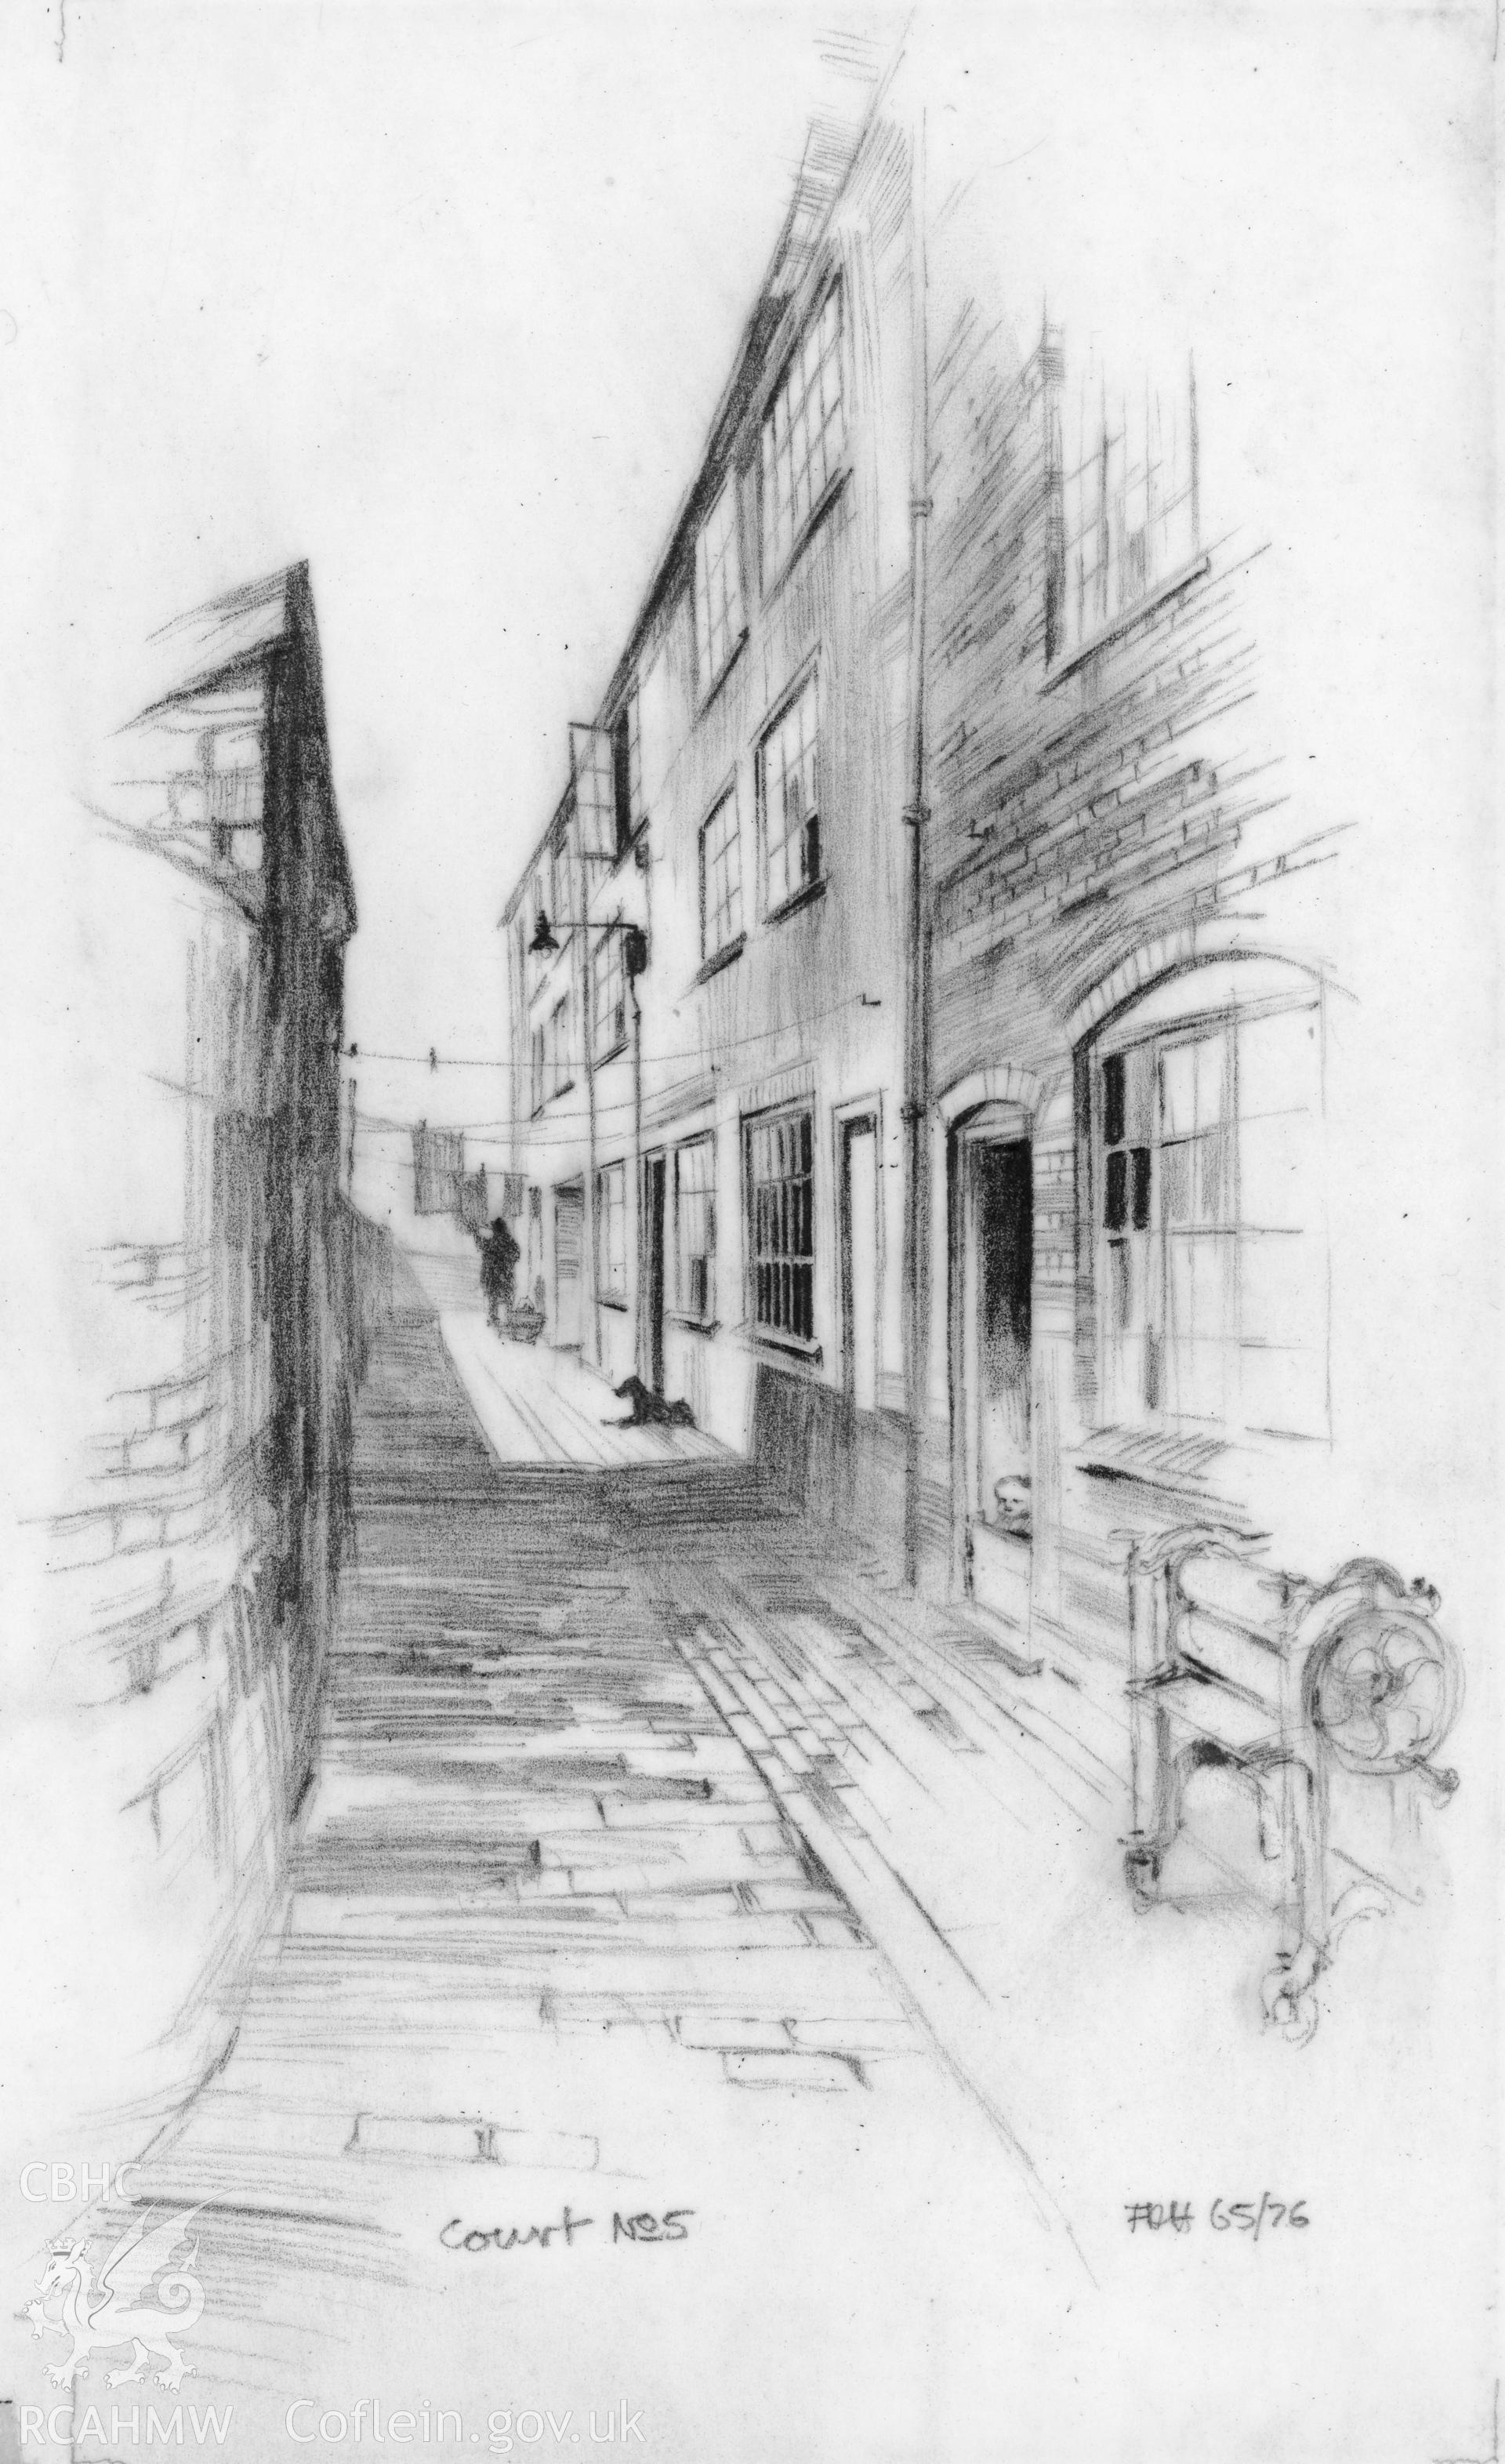 Spon End, Coventry - Court No. 5: (pencil) drawing showing the south of the street, looking down the Court.